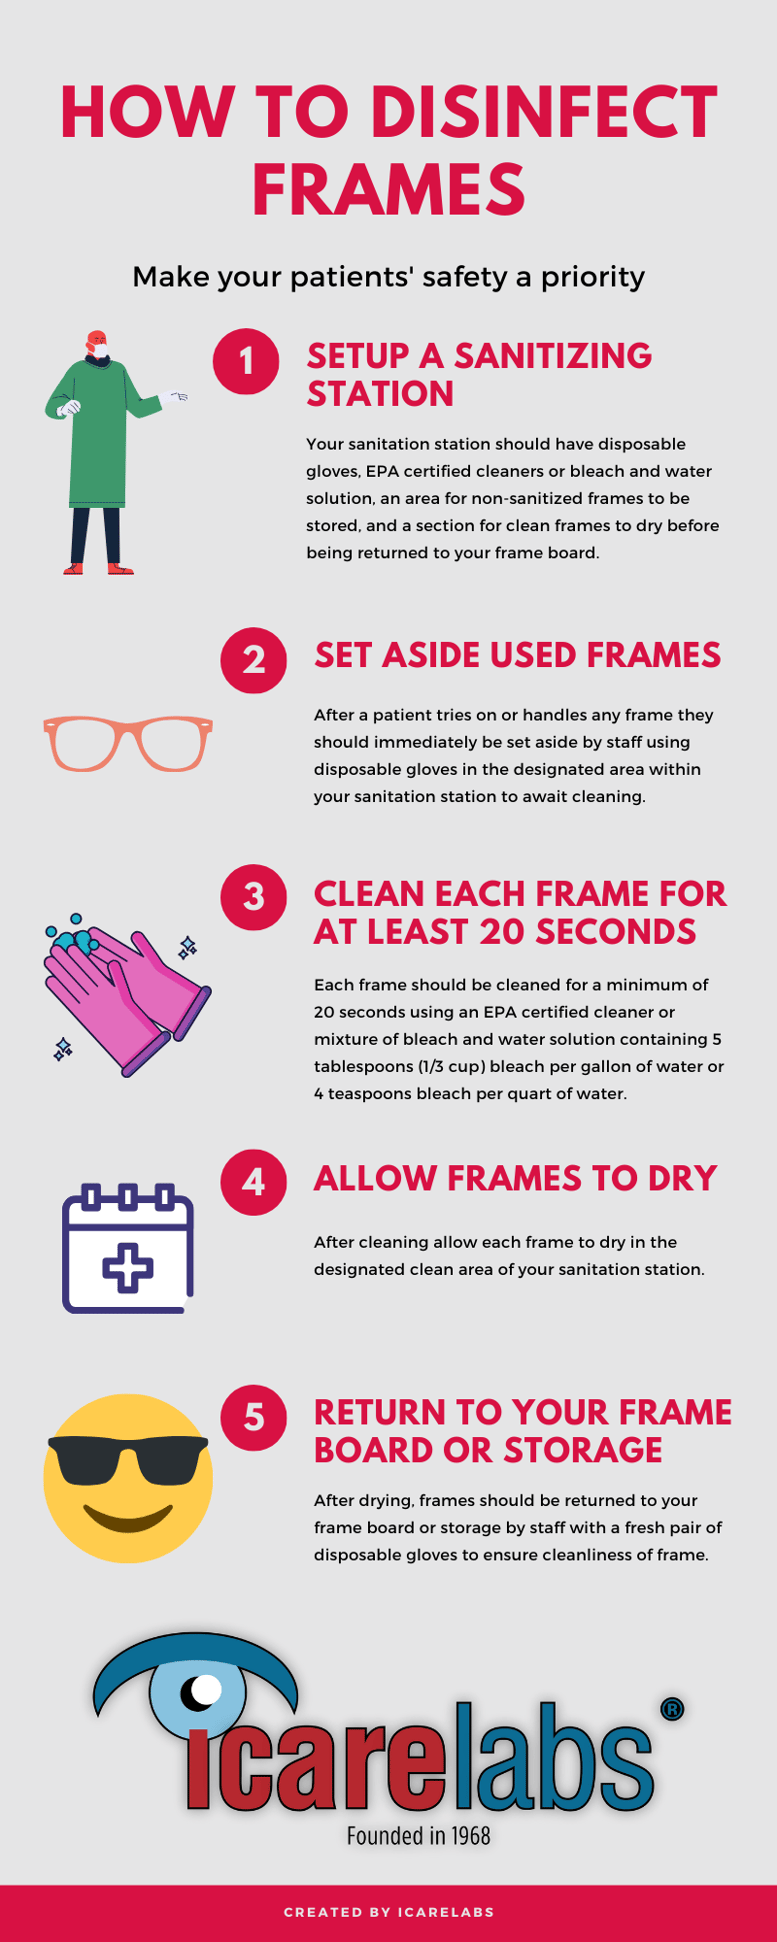 5 easy steps to disinfect your frames by IcareLabs